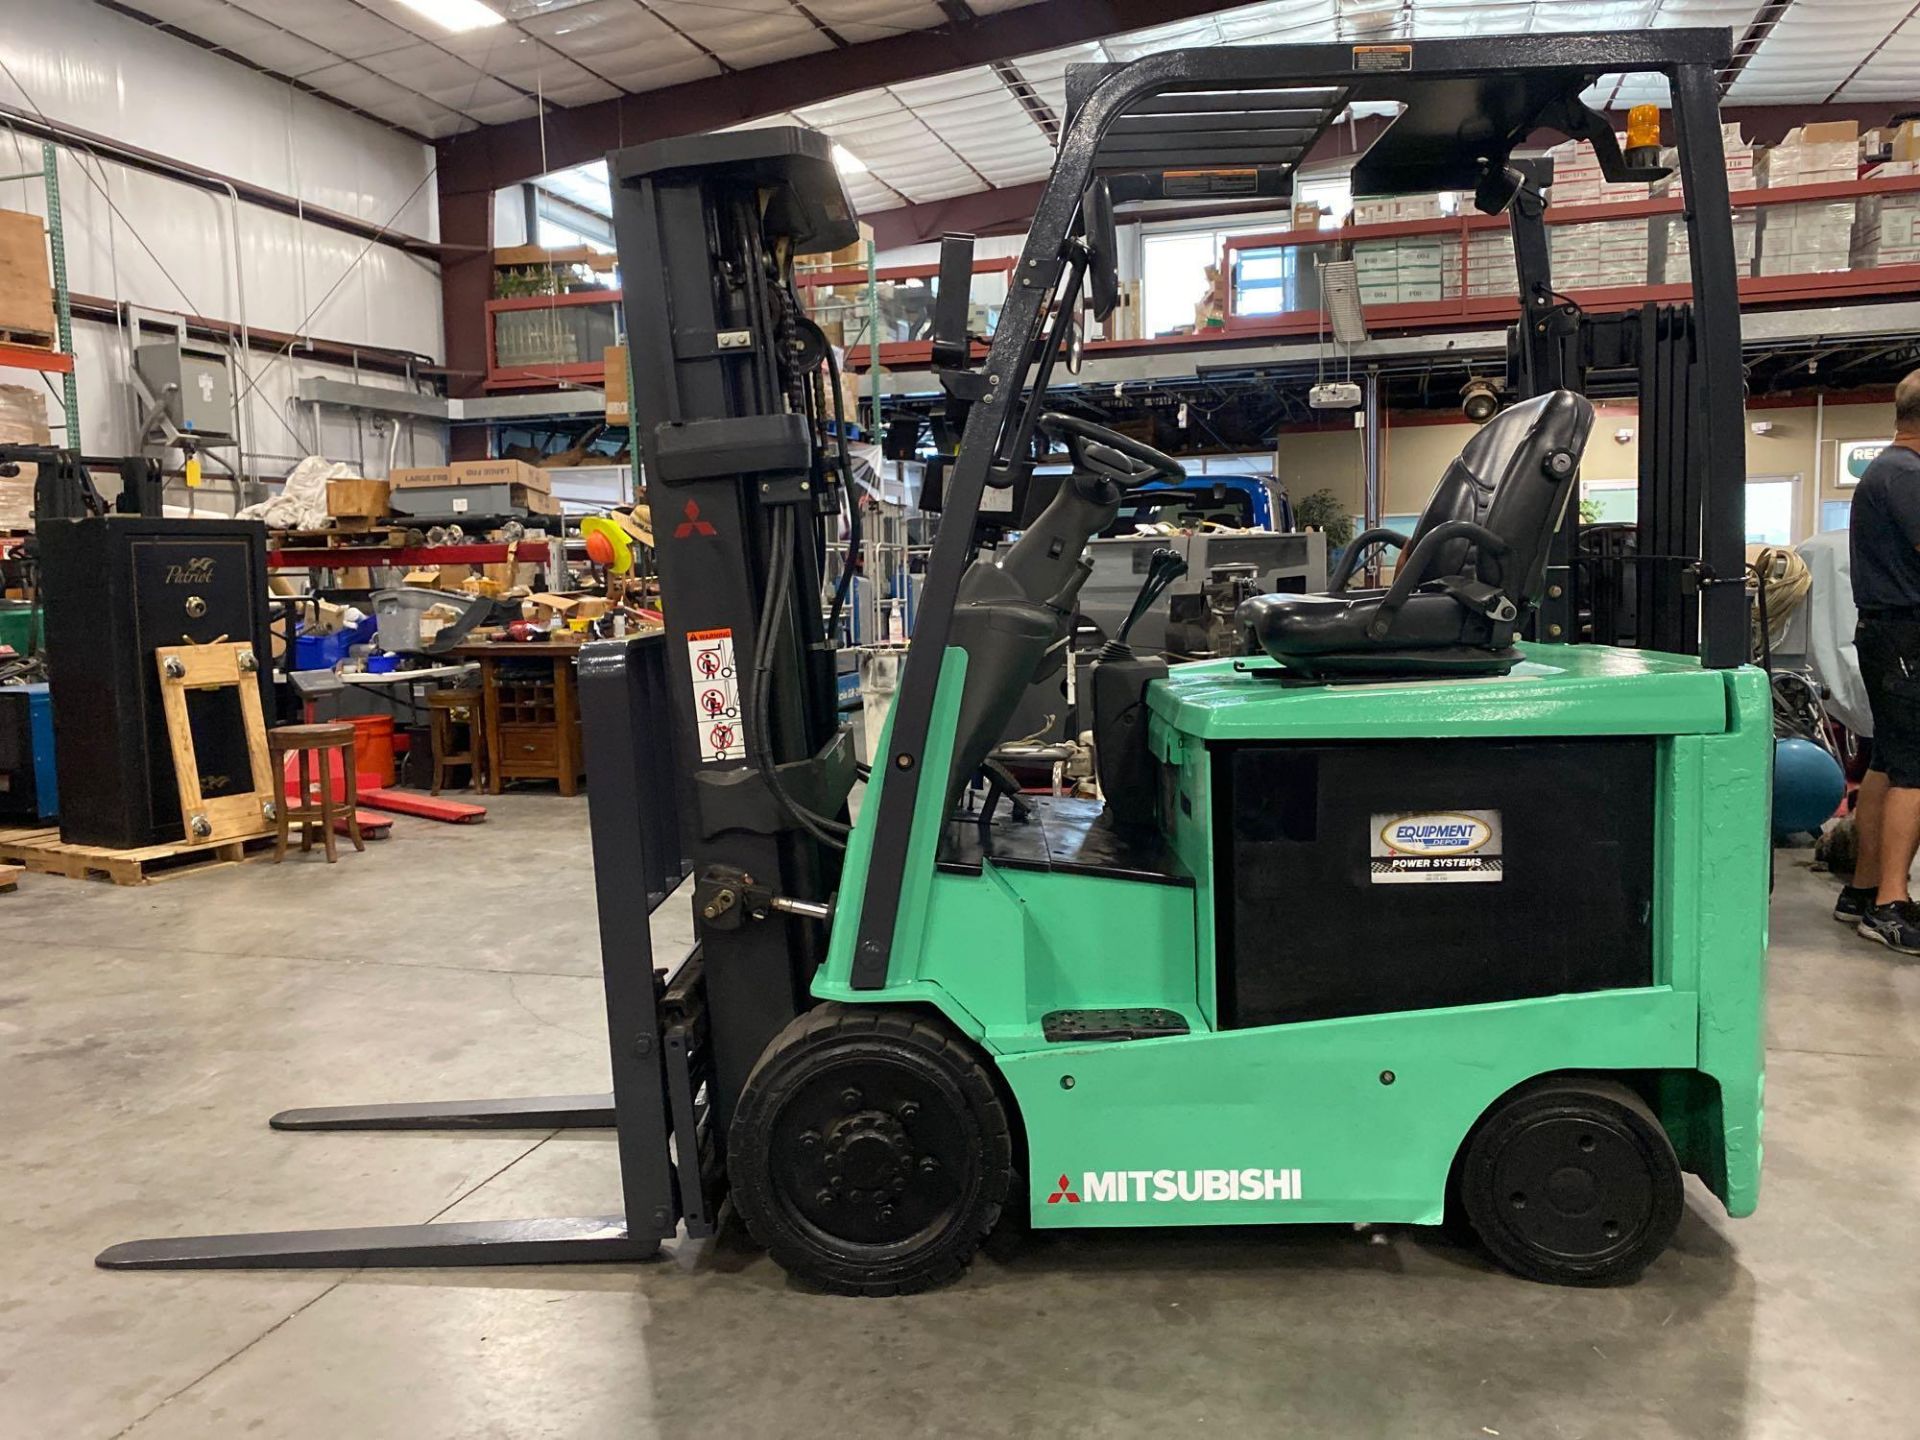 2016 MITSUBISHI FBC25N2 ELECTRIC FORKLIFT, APPROX. 4,500 LB CAPACITY - Image 5 of 12